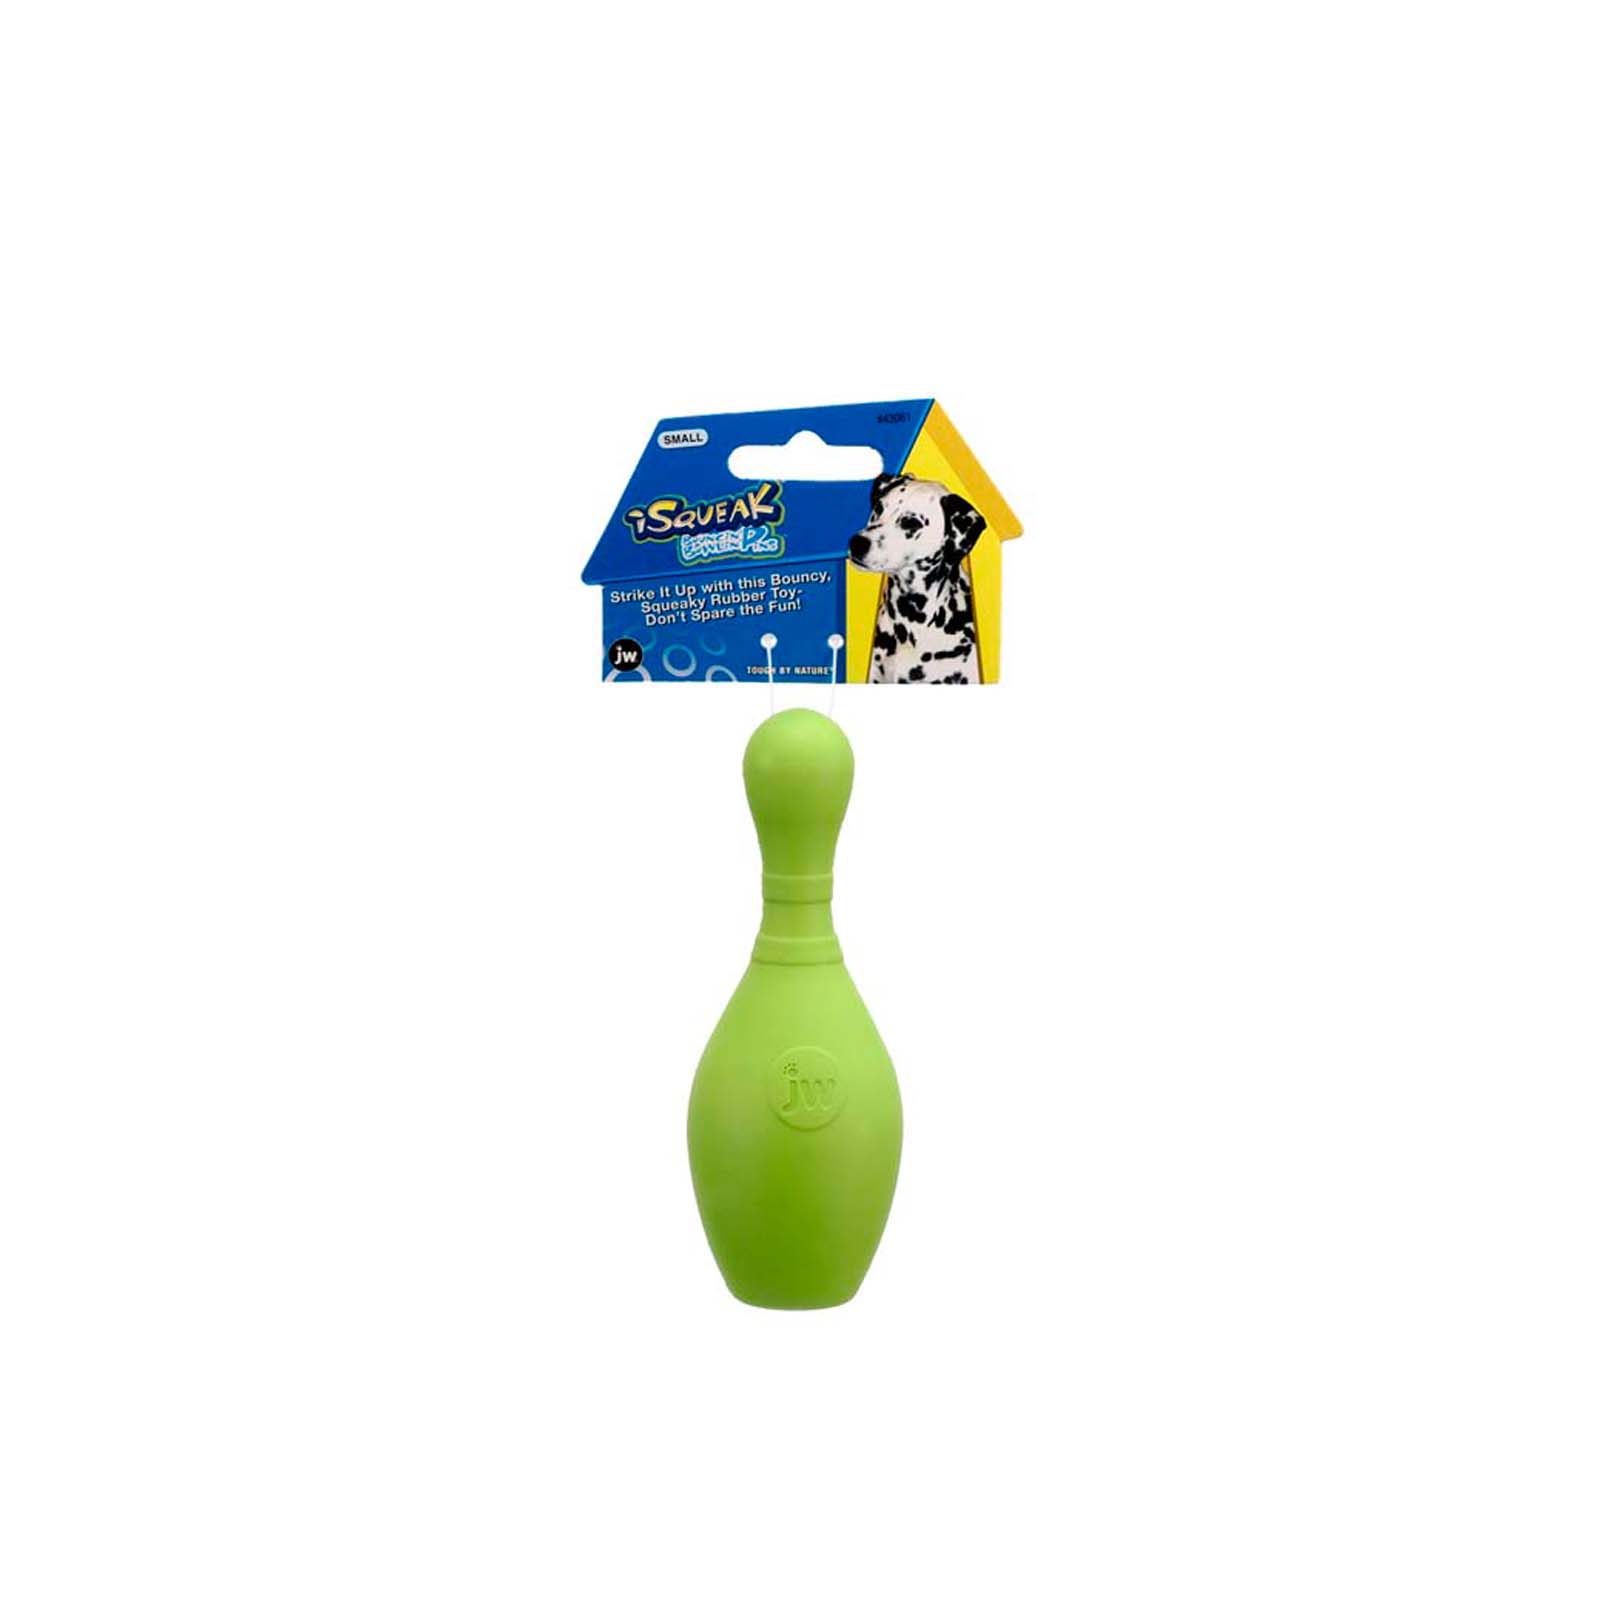 Jw Pet Company Toy Isqueak Bowling Pin Small